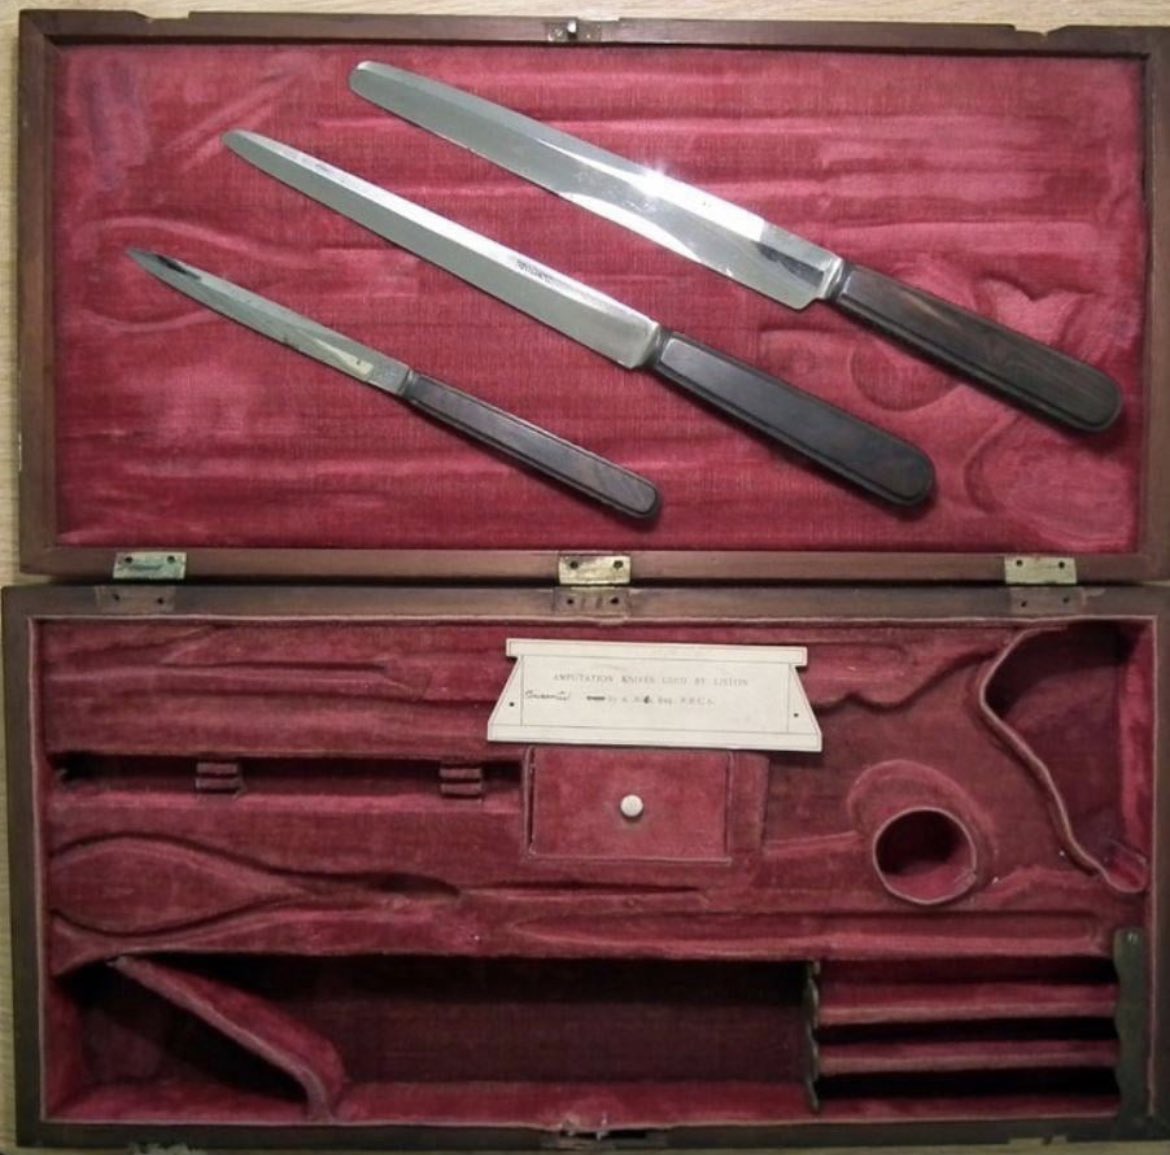 The amputation instruments used by the the infamous surgeon Robert Liston between 1815 and 1825. 

In the 1800s, Scottish surgeon Robert Liston became infamous for a surgery that led to an astonishing 300% mortality rate. 

He amputated a patient's leg in under 2.5 minutes,